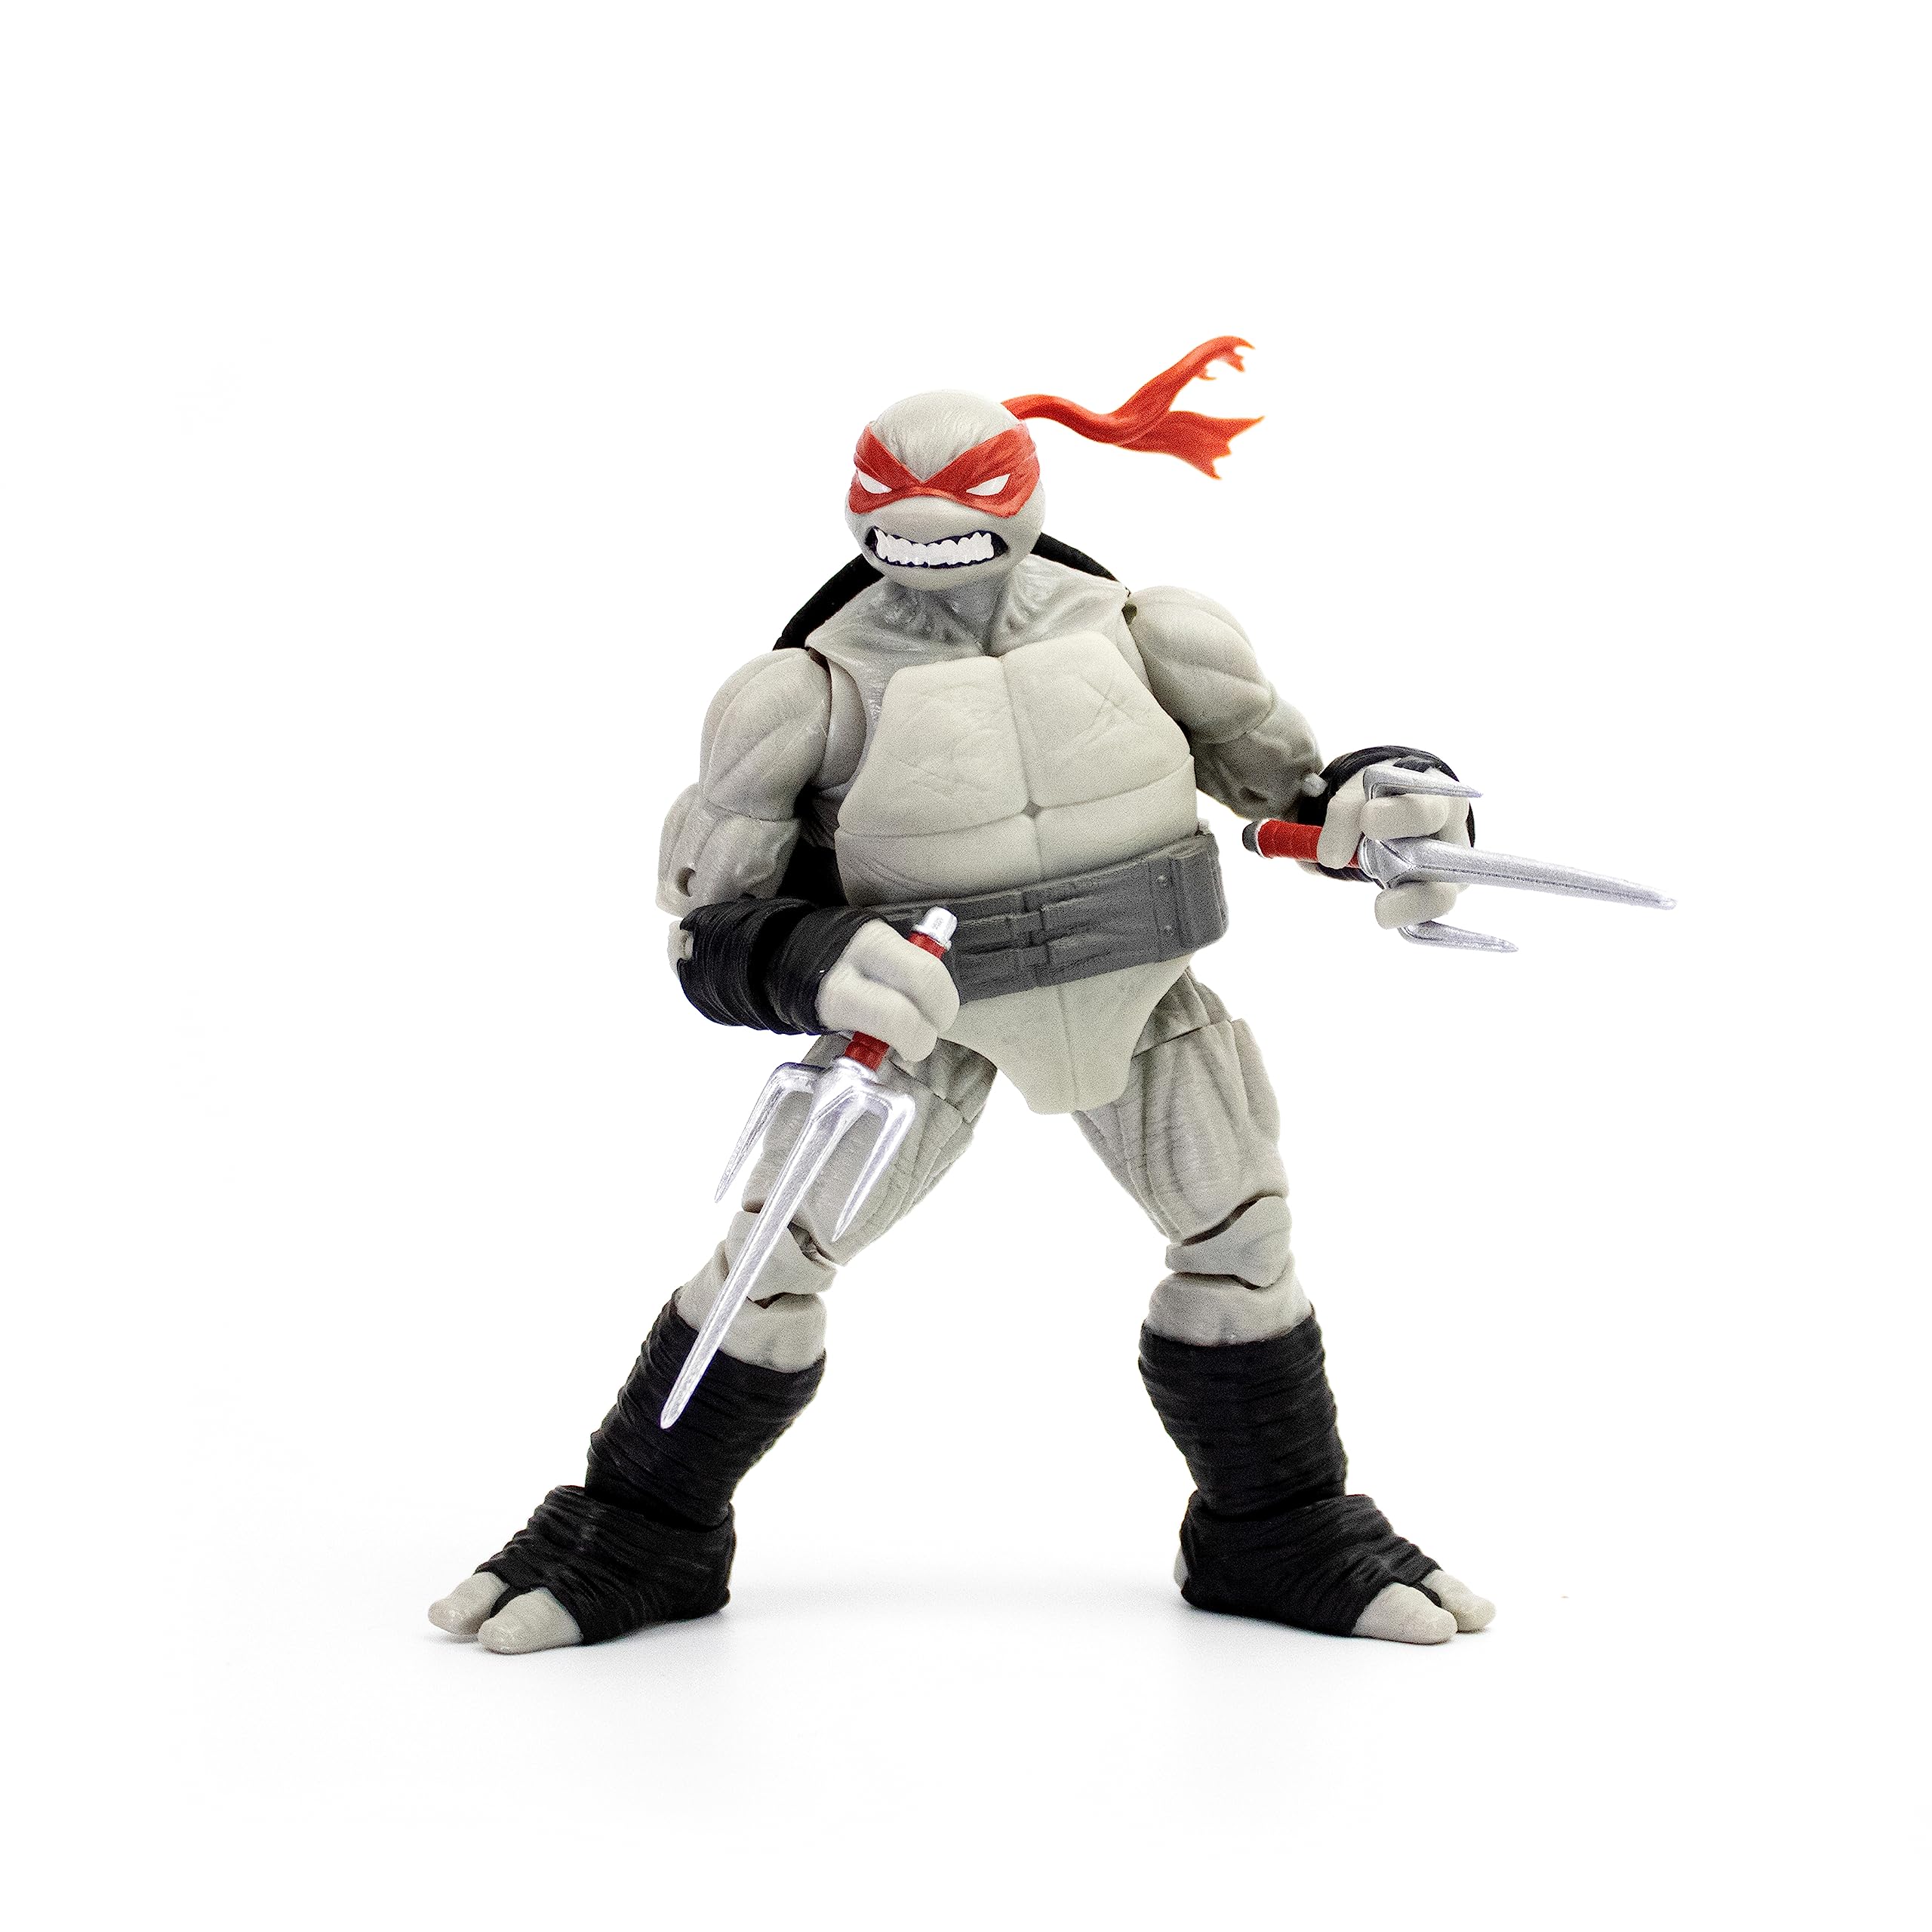 The Loyal Subjects Teenage Mutant Ninja Turtles BST AXN IDW Comic Inspired 'Black & White' 5-inch Action Figure 4-Pack